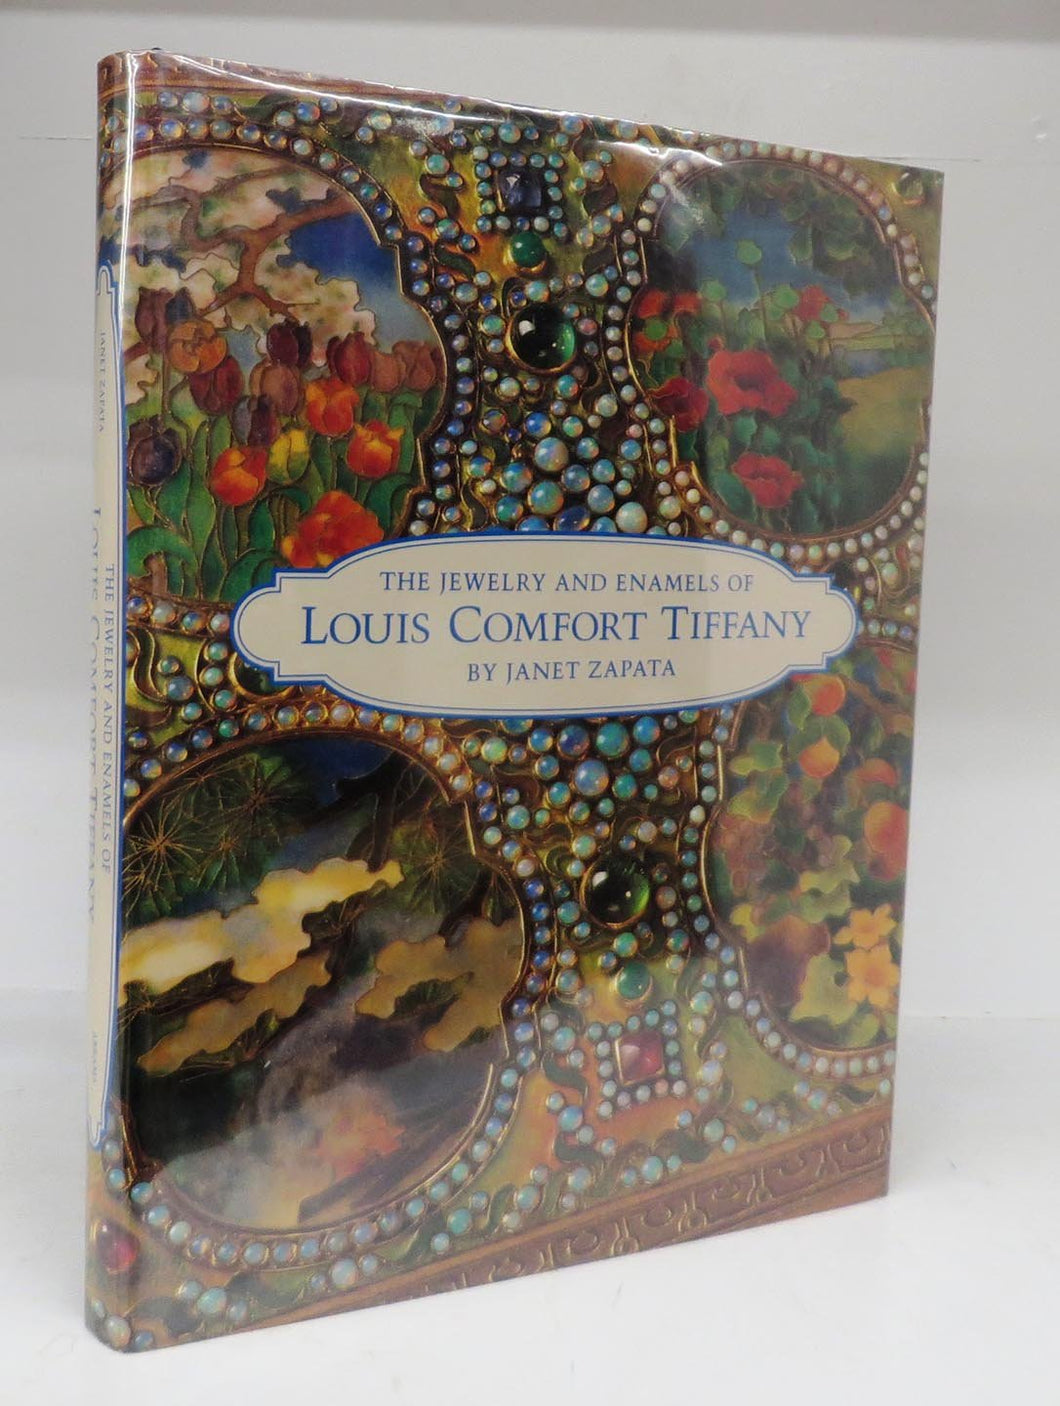 The Jewelry and Enamels of Louis Comfort Tiffany – Attic Books